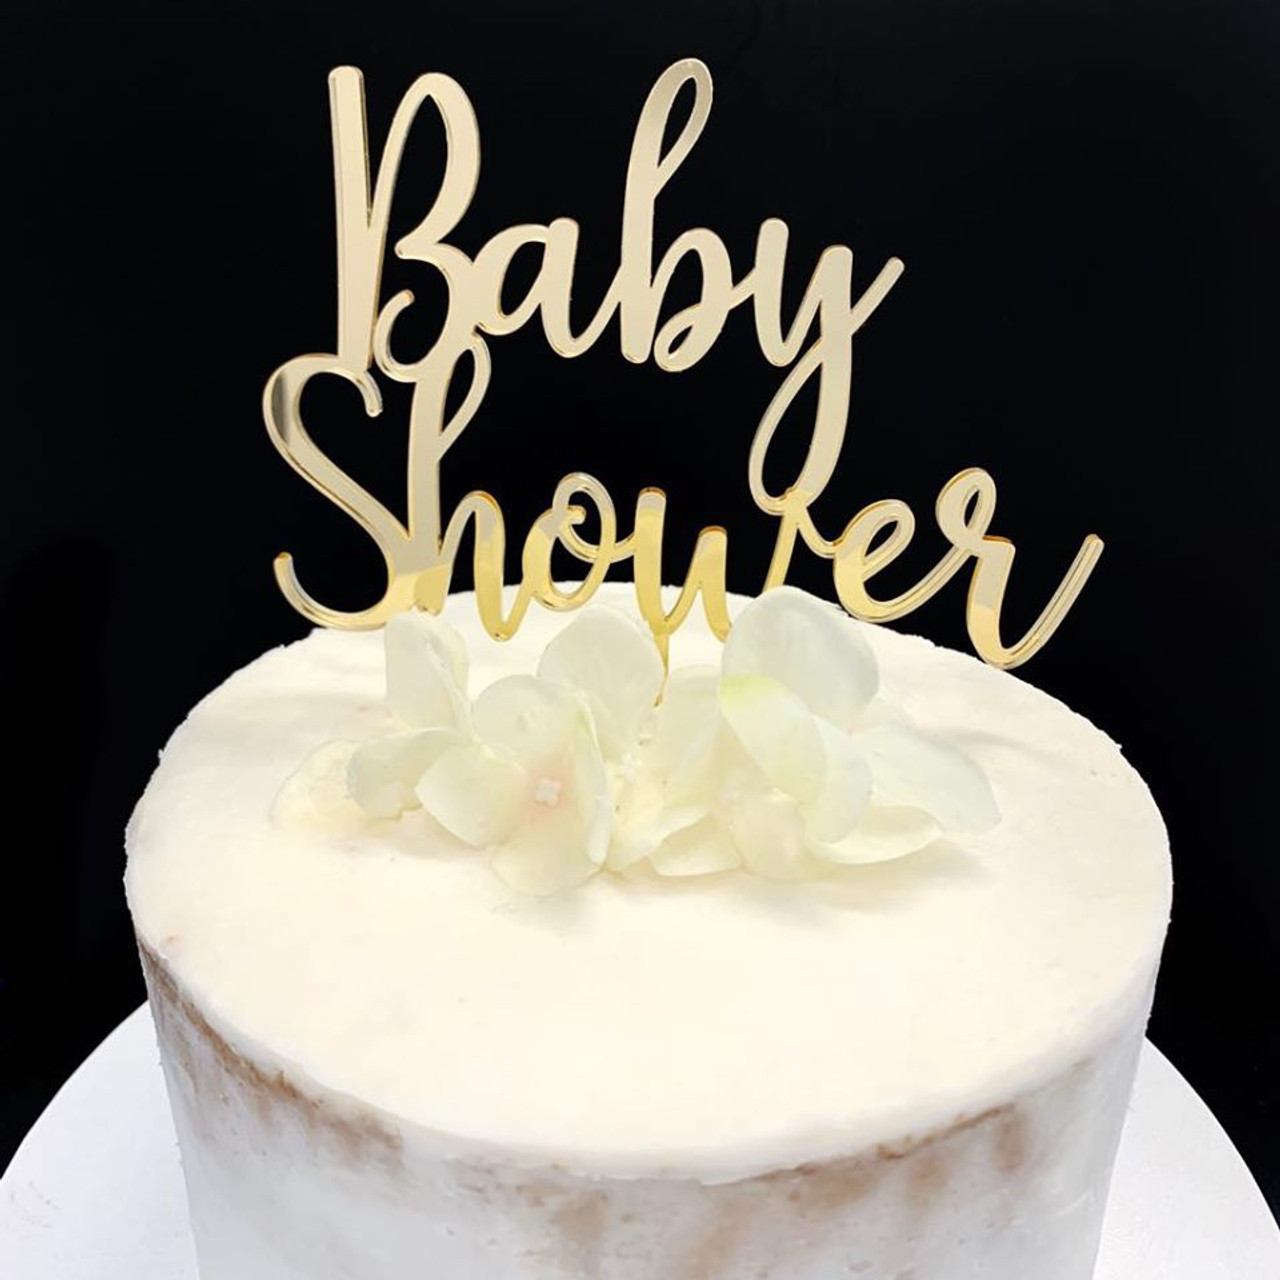 Baby Shower Cake Topper, Oh Baby Cake Topper